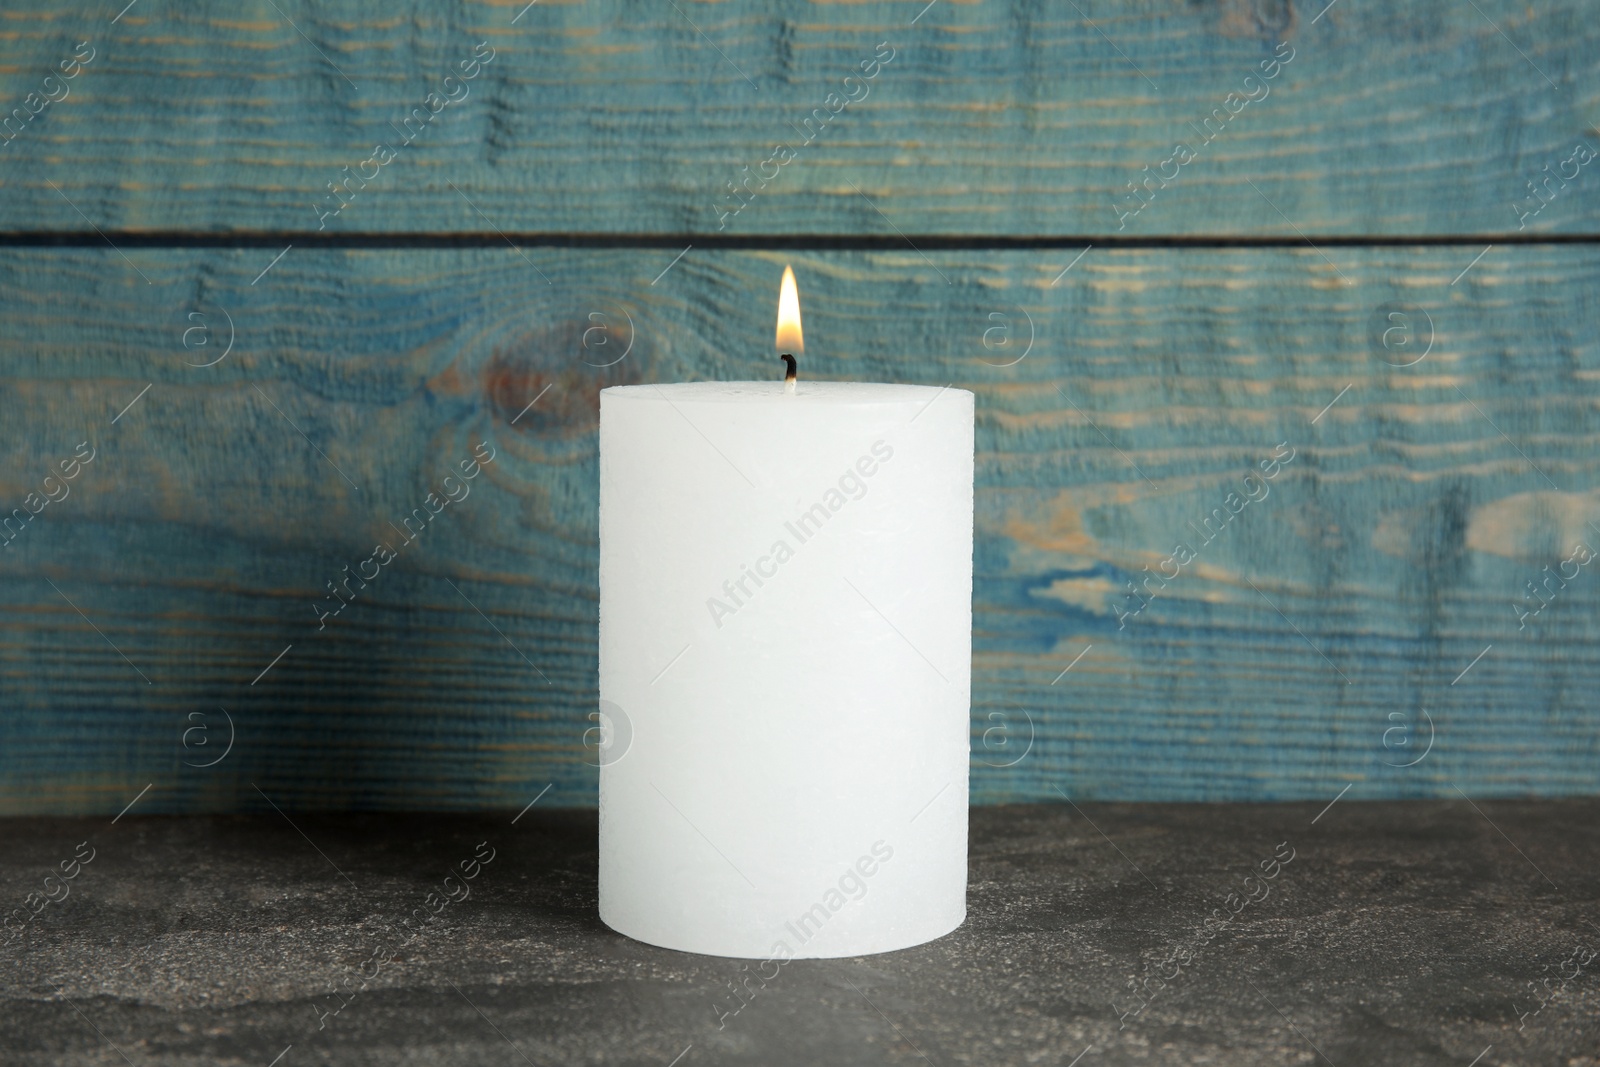 Photo of Alight wax candle on table against wooden background